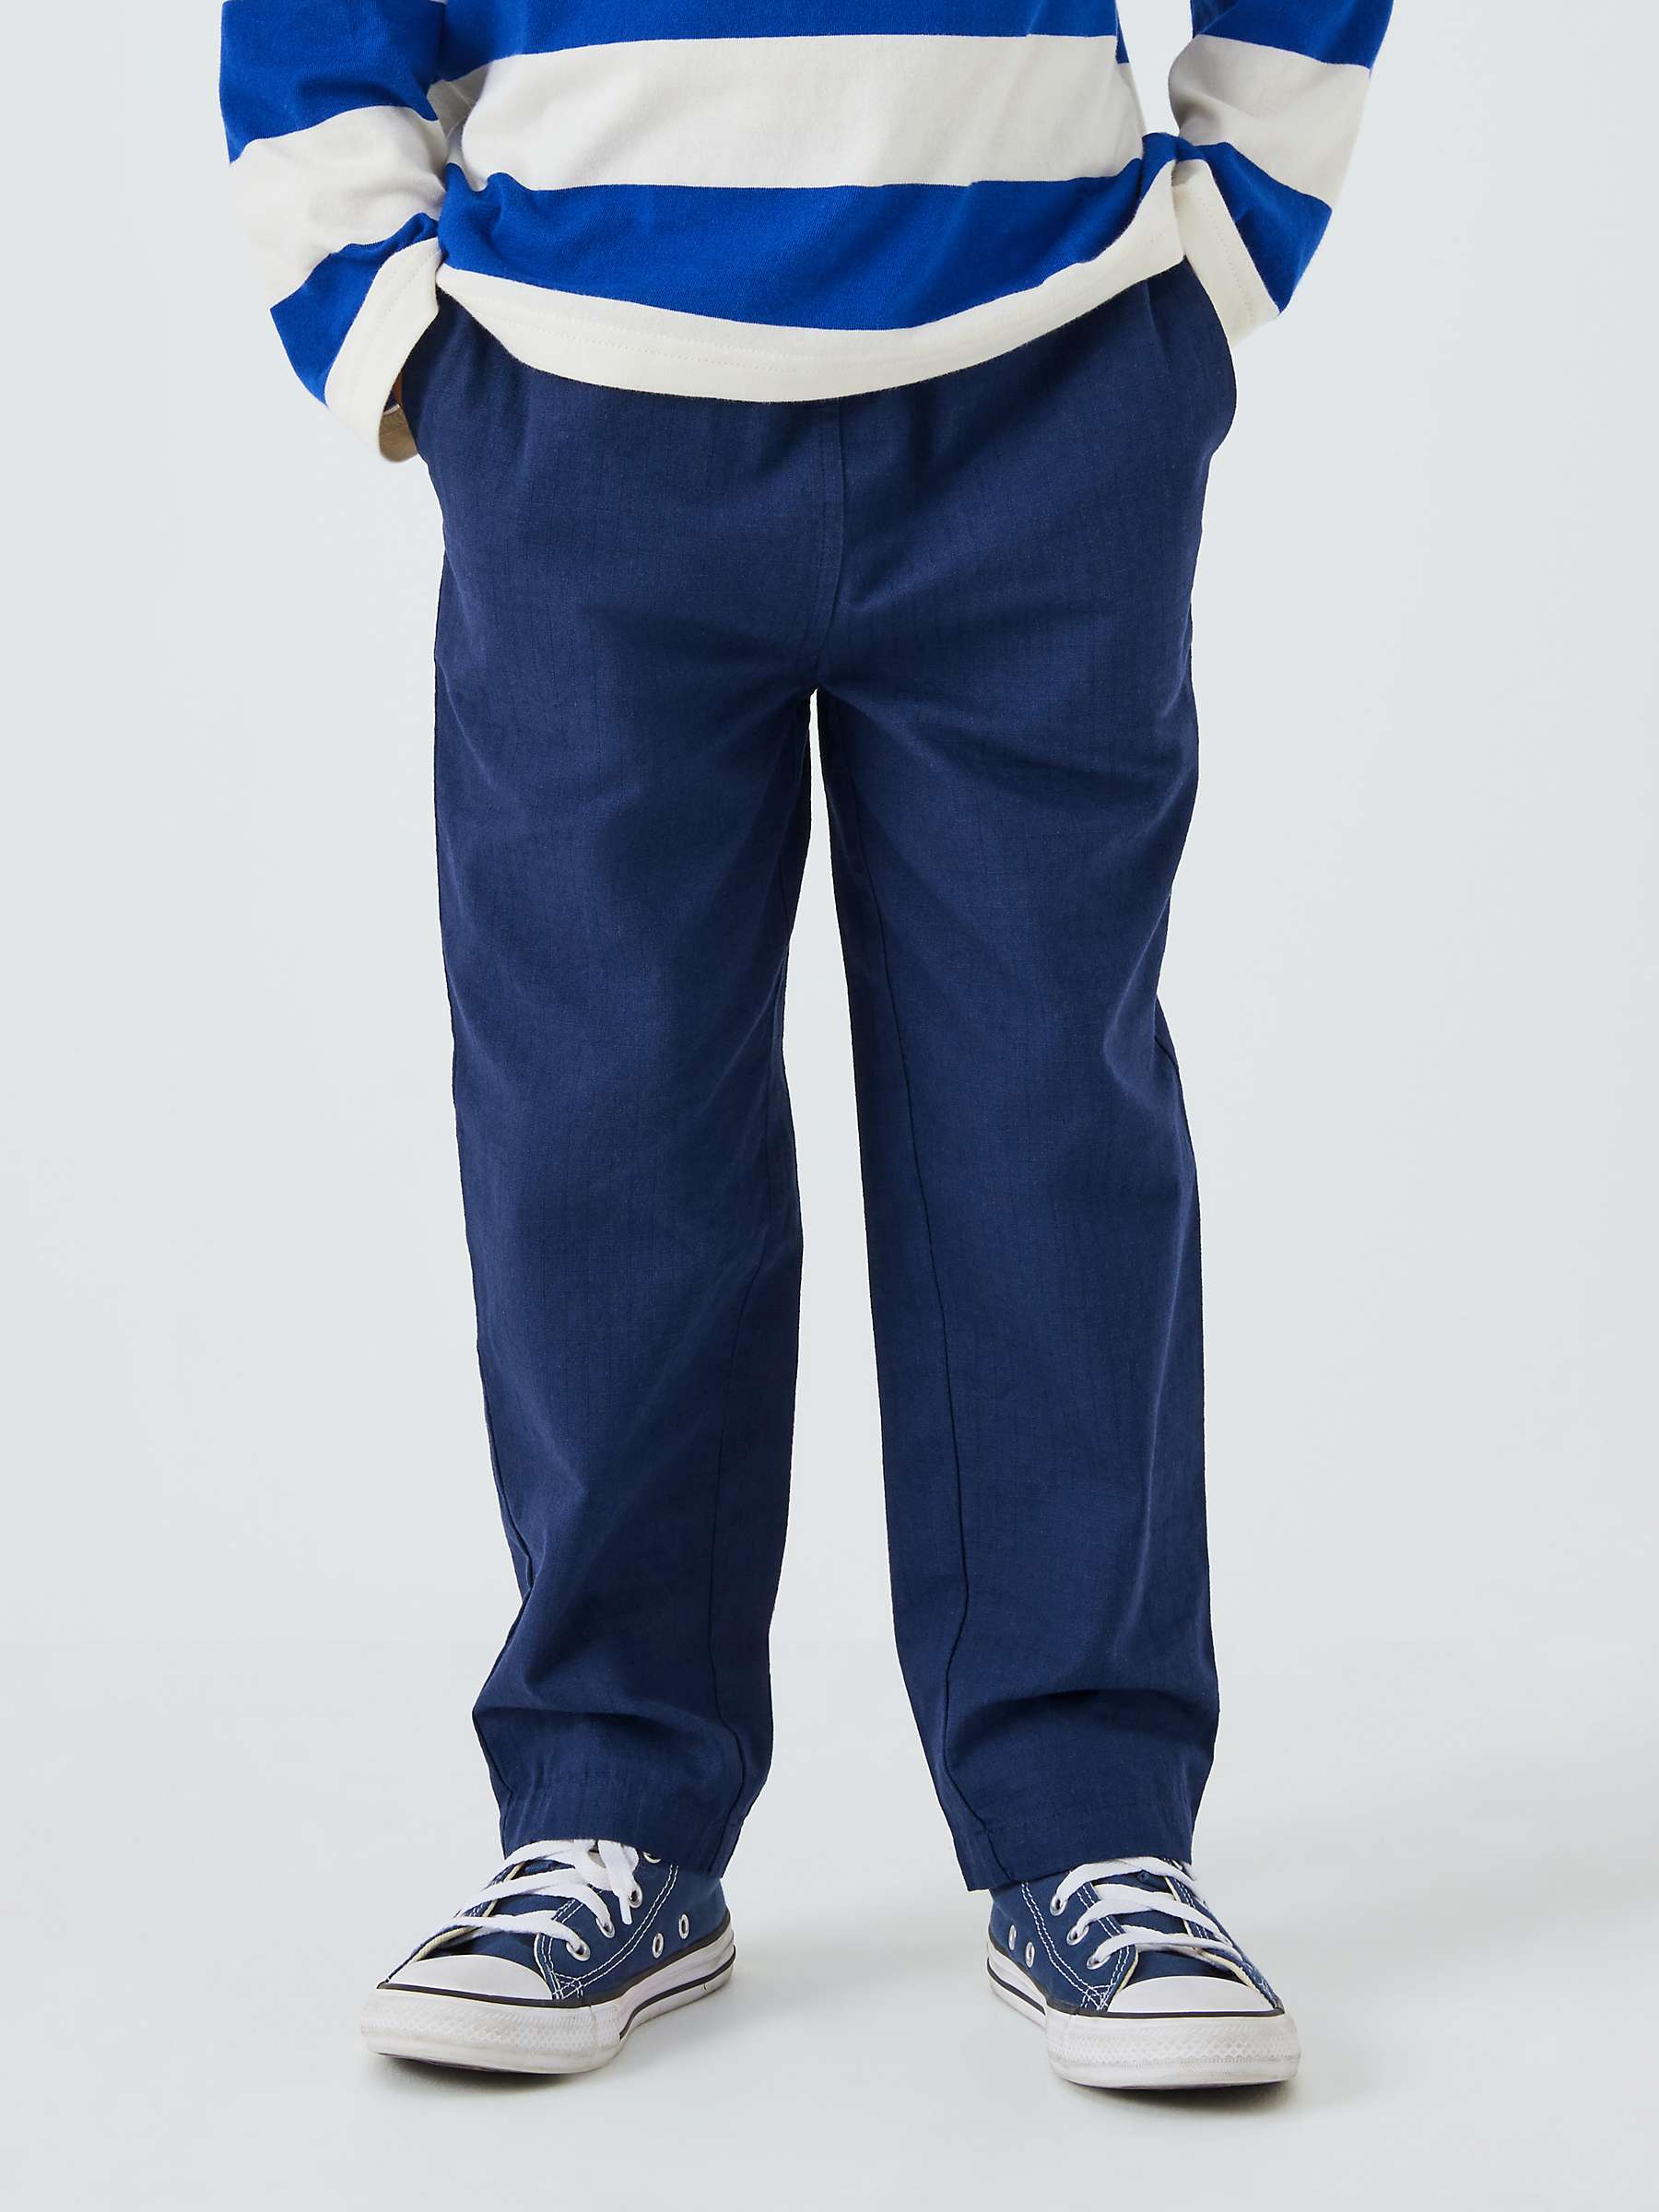 Buy John Lewis ANYDAY Kids' Plain Ripstop Trousers Online at johnlewis.com